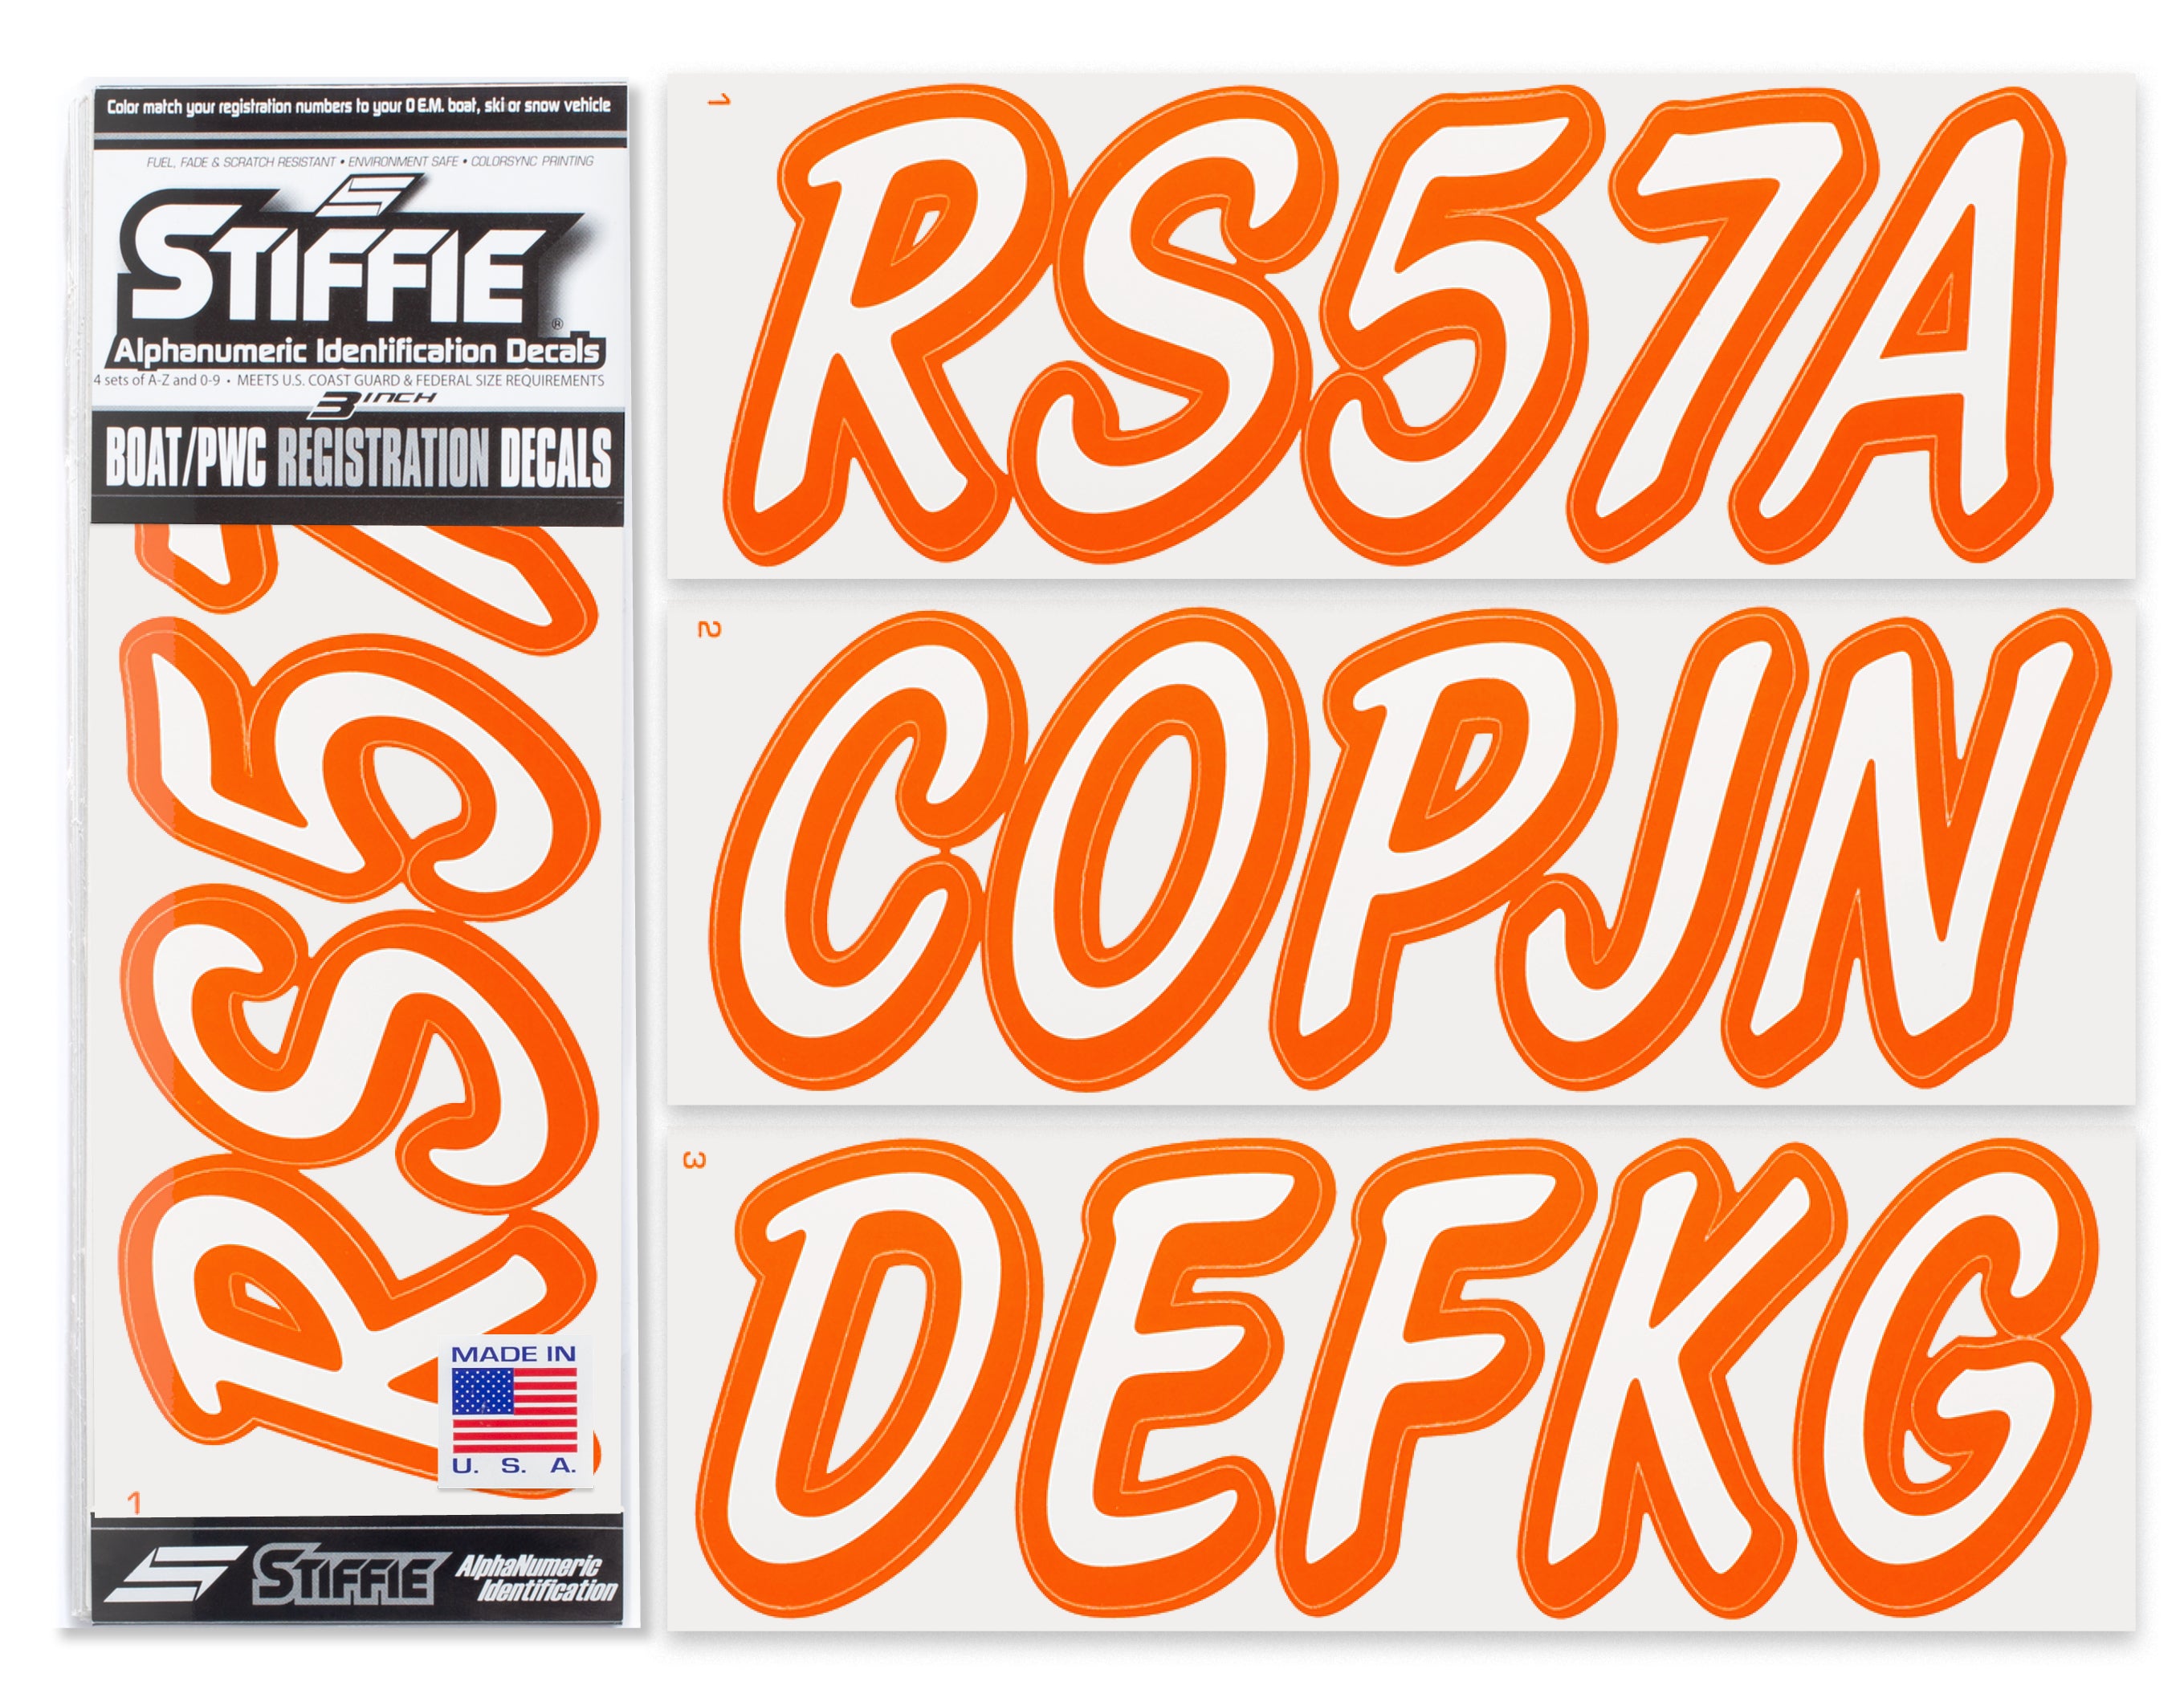 STIFFIE Whipline Solid White/Orange 3" Alpha-Numeric Registration Identification Numbers Stickers Decals for Boats & Personal Watercraft